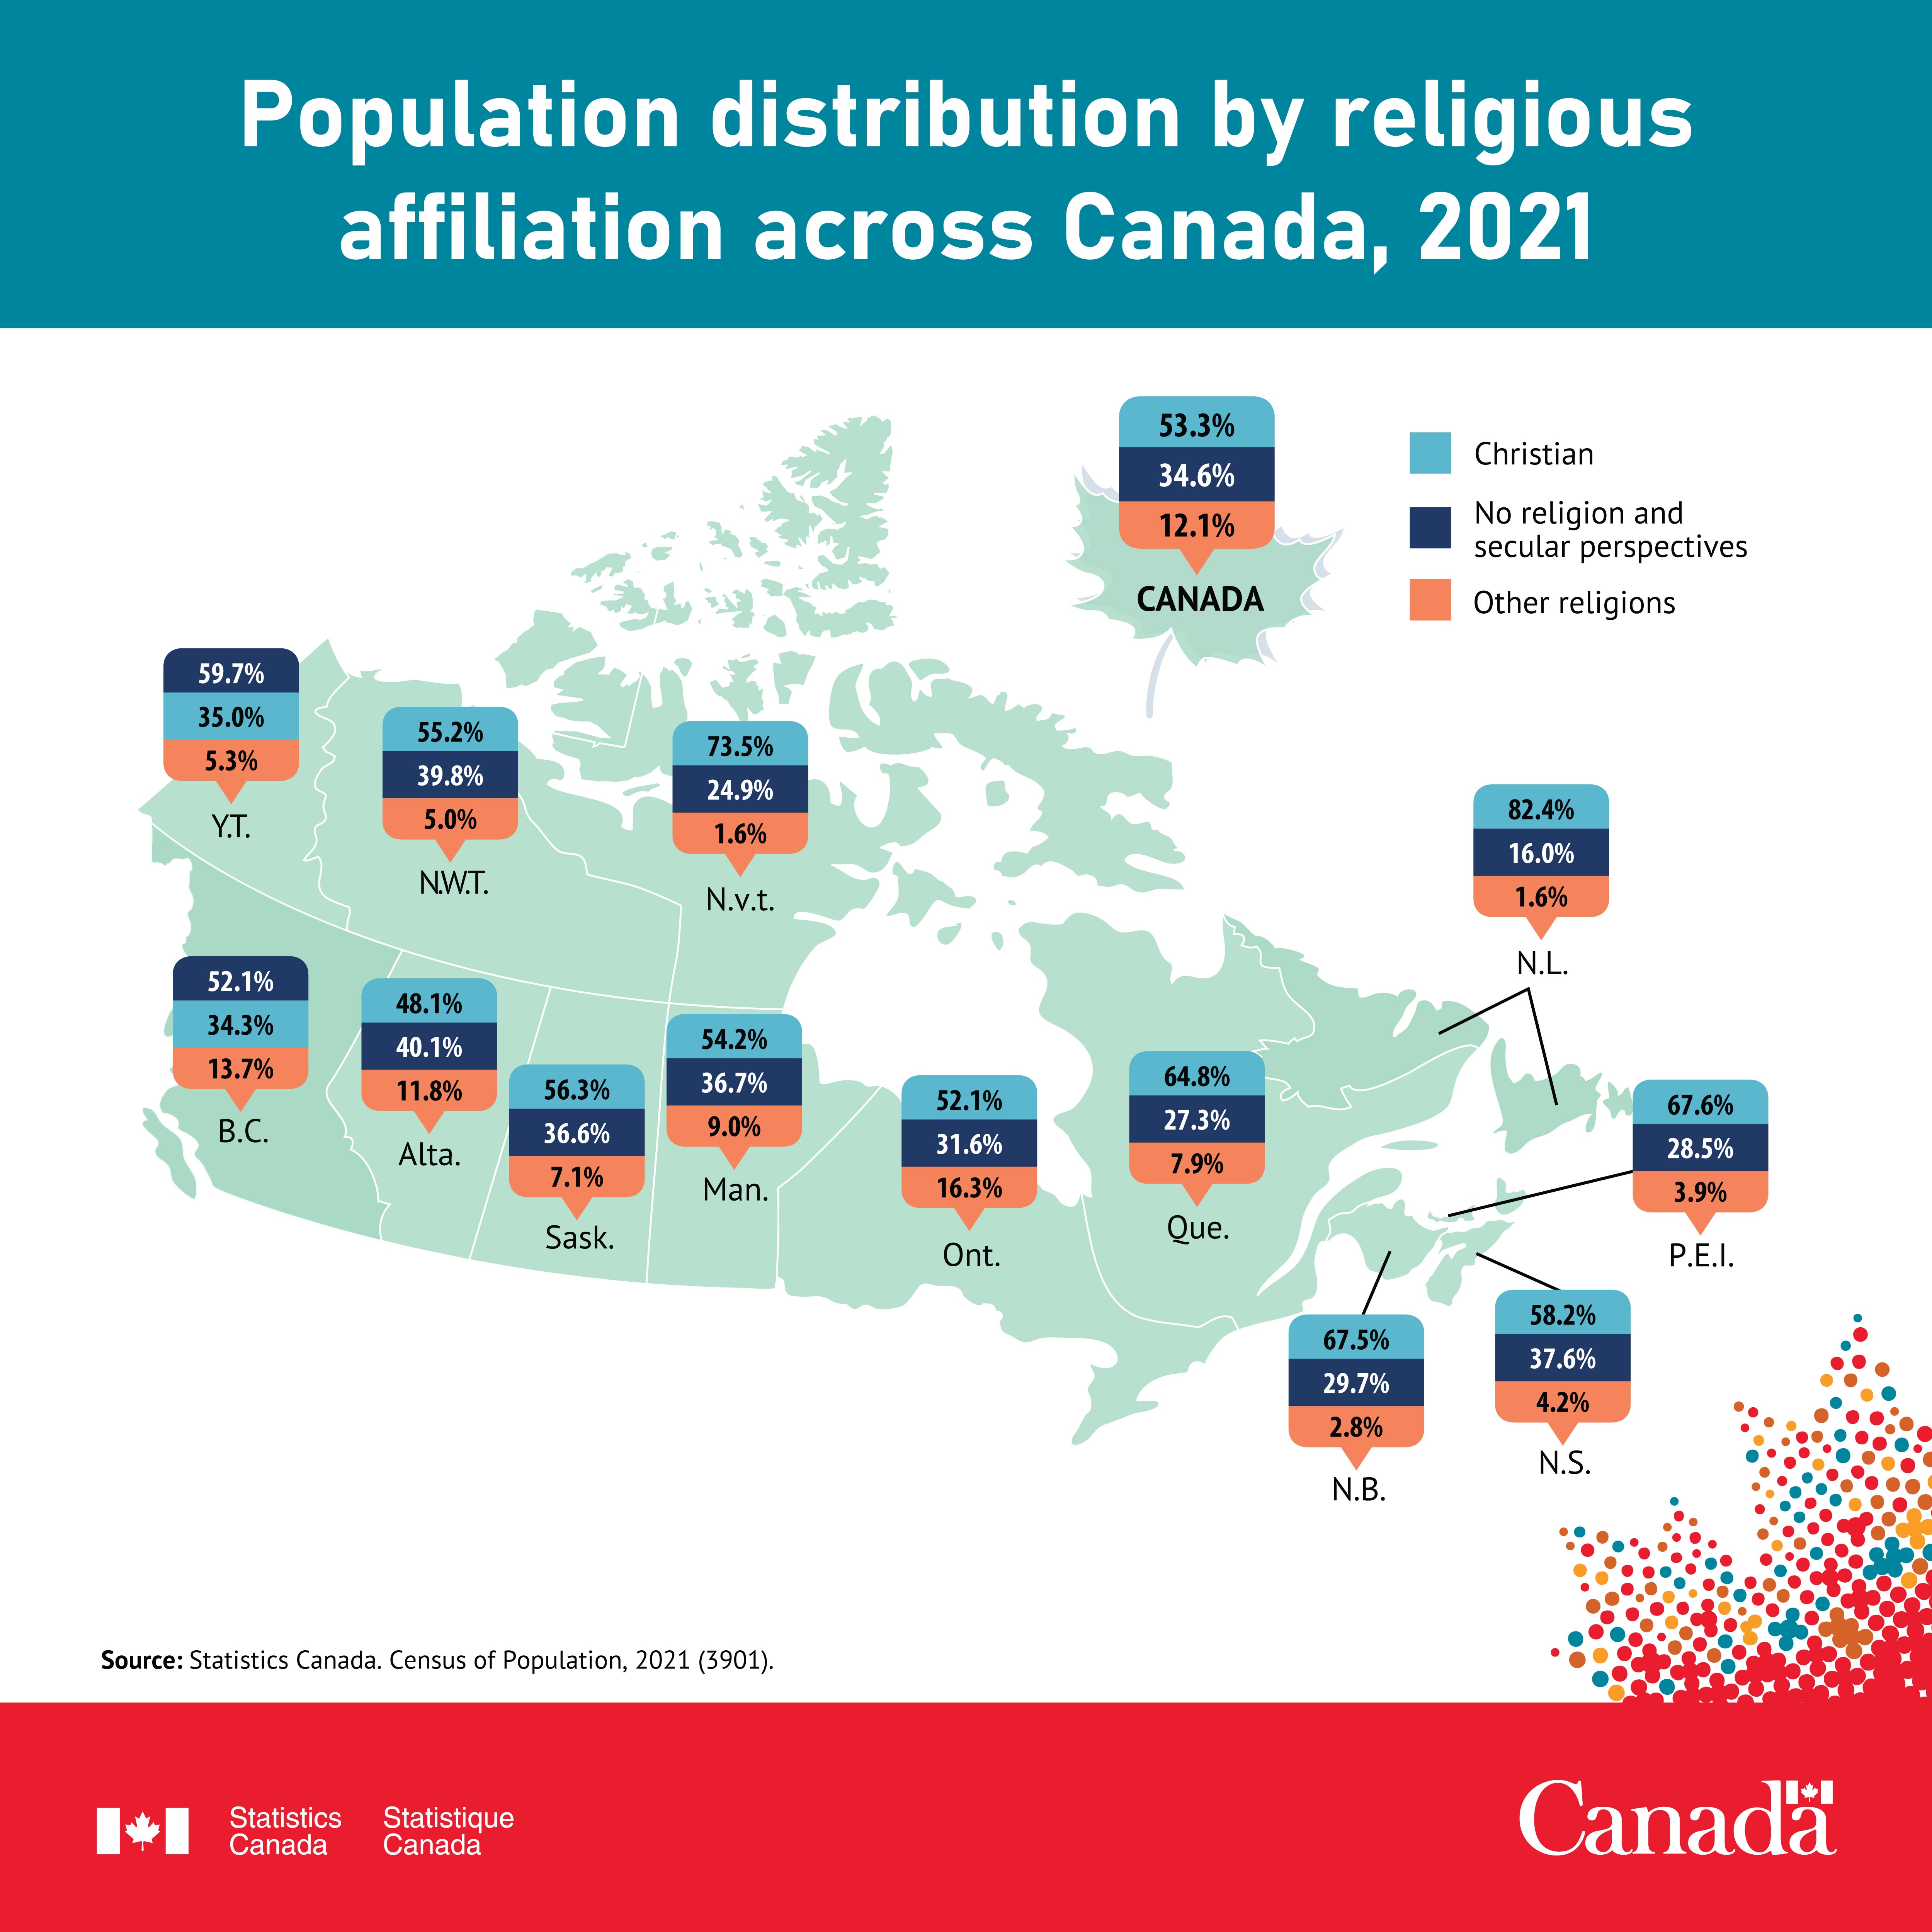 Population distribution by religious affiliation across Canada, 2021